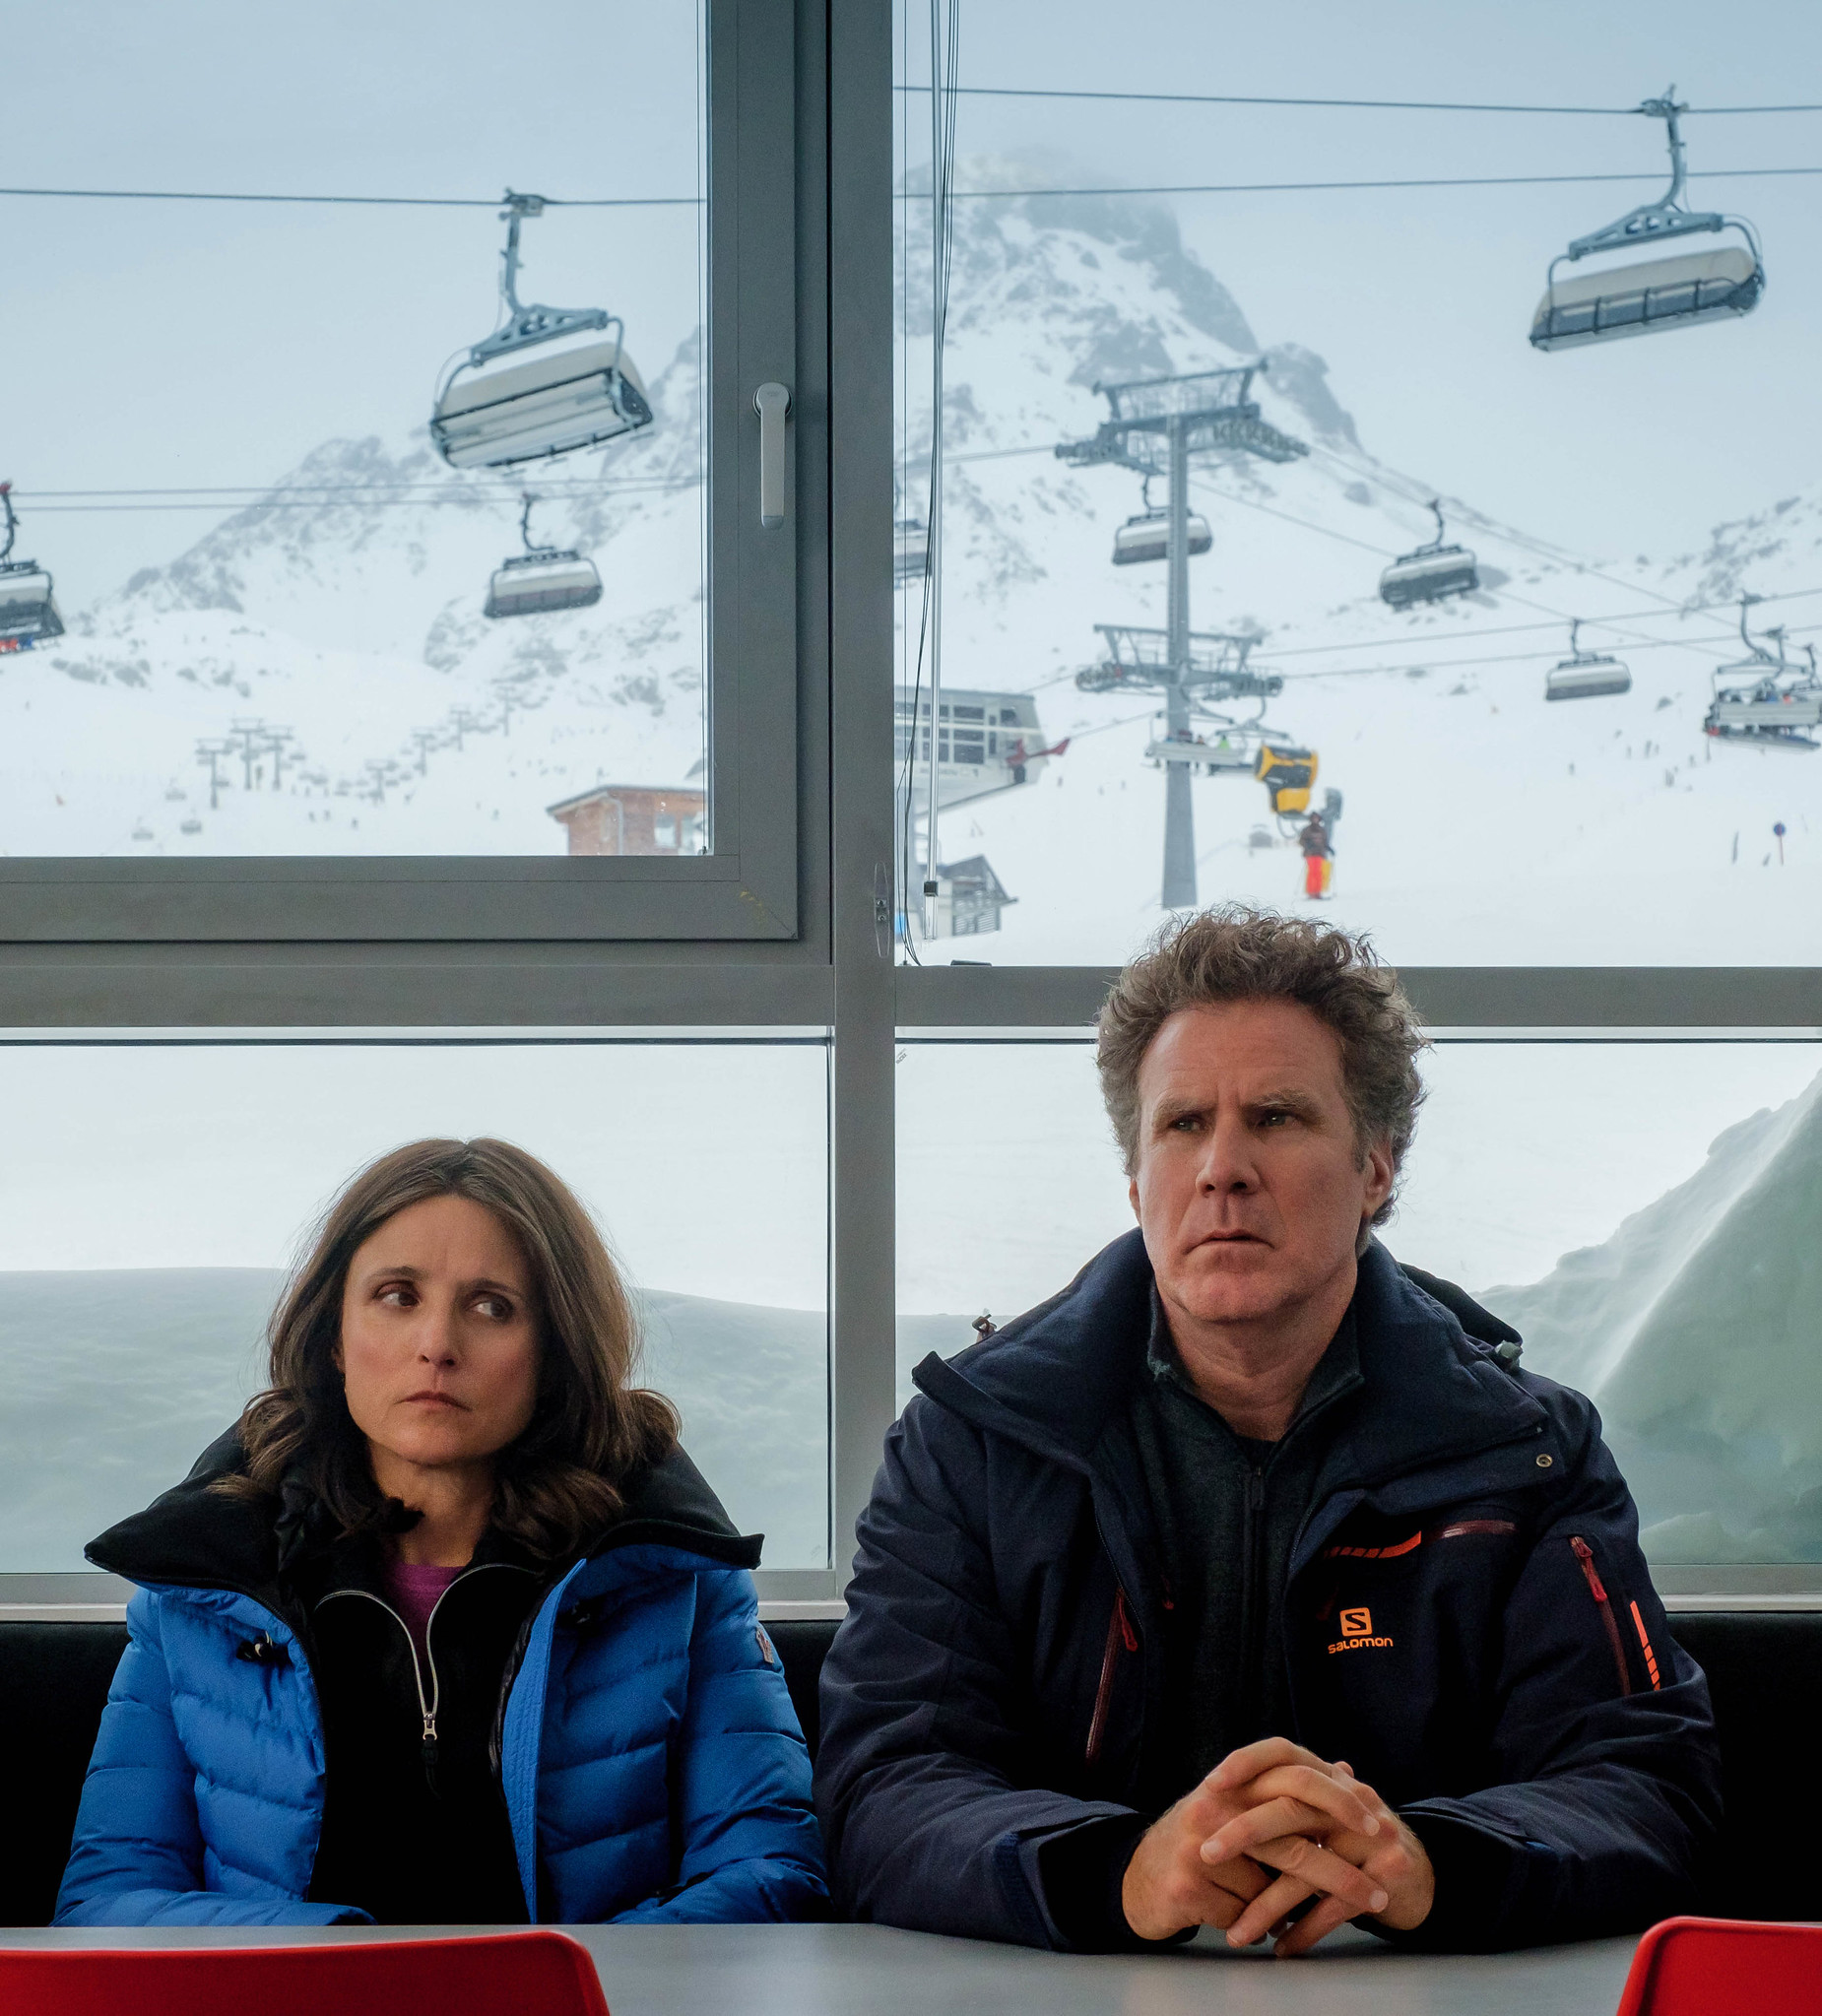 Julia Louis-Dreyfus and Will Ferrel appear in Downhill by Jim Rash and Nat Faxon, an official selection of the Premieres program at the 2020 Sundance Film Festival. Courtesy of Sundance Institute.